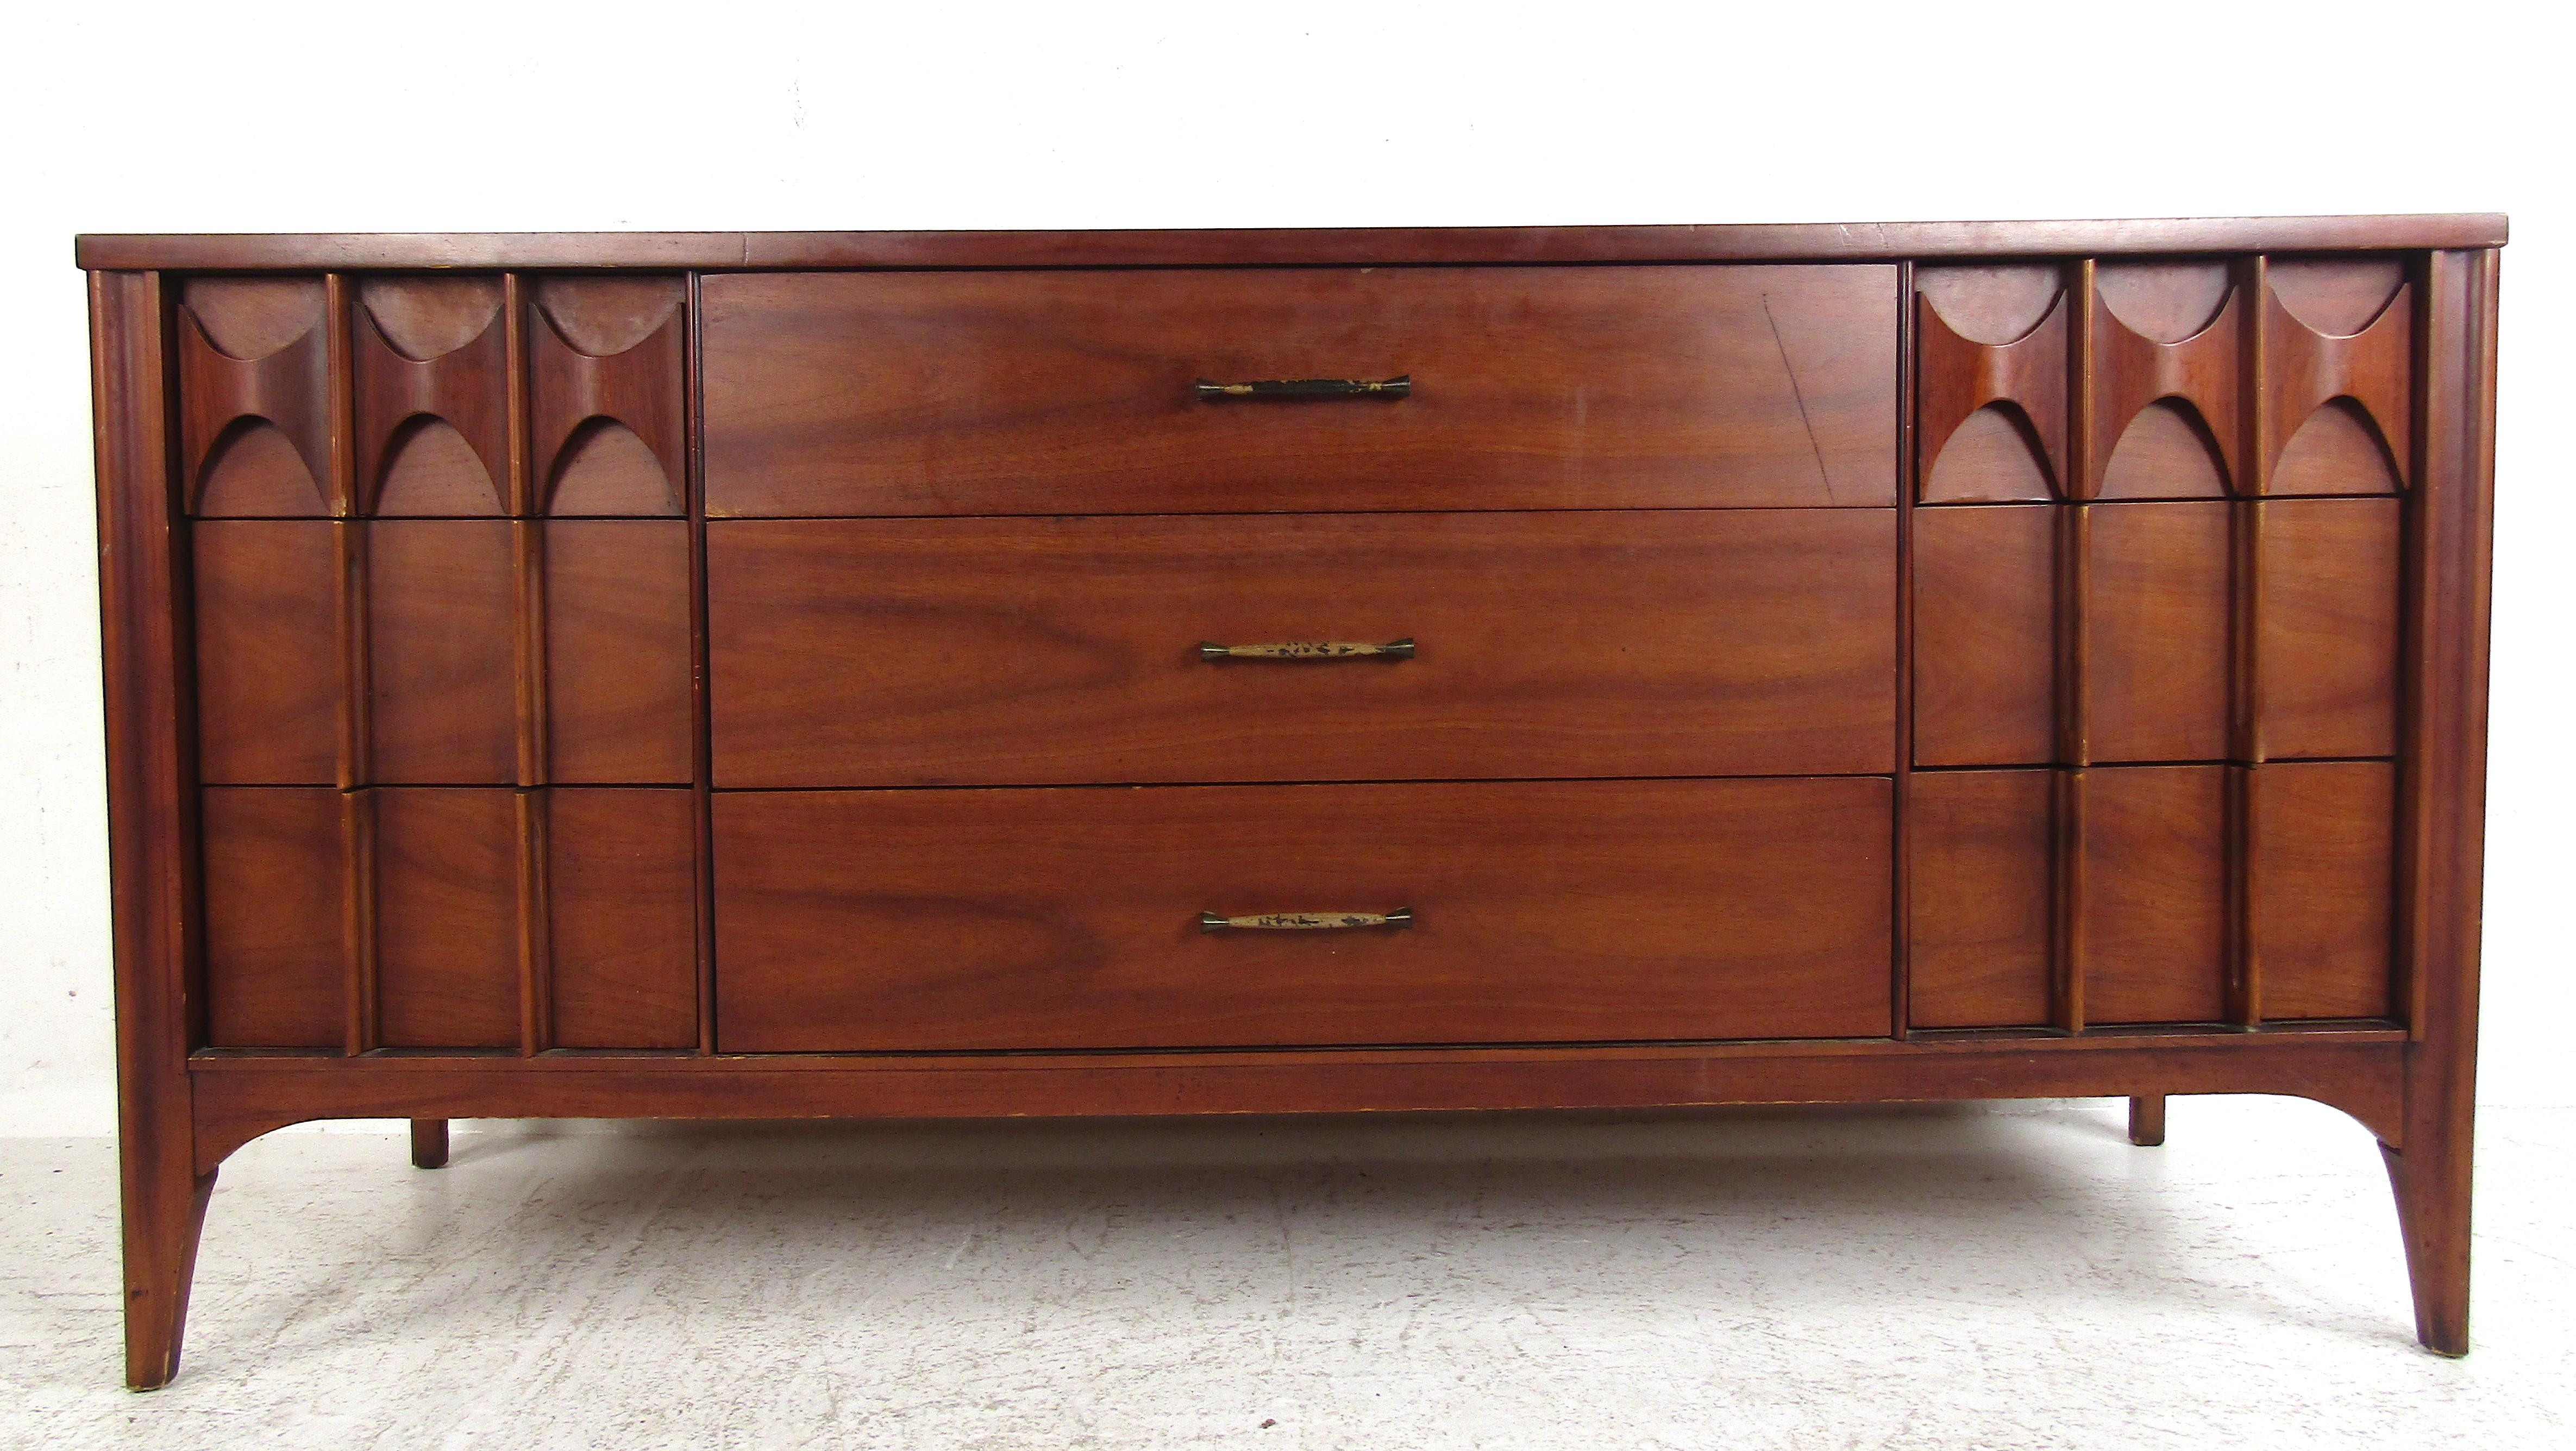 This beautiful vintage modern dresser features sculpted rosewood handles and a walnut casing. A spacious nine drawer dresser that provides ample storage space without sacrificing style. Elegant walnut wood grain makes this a beautiful addition to